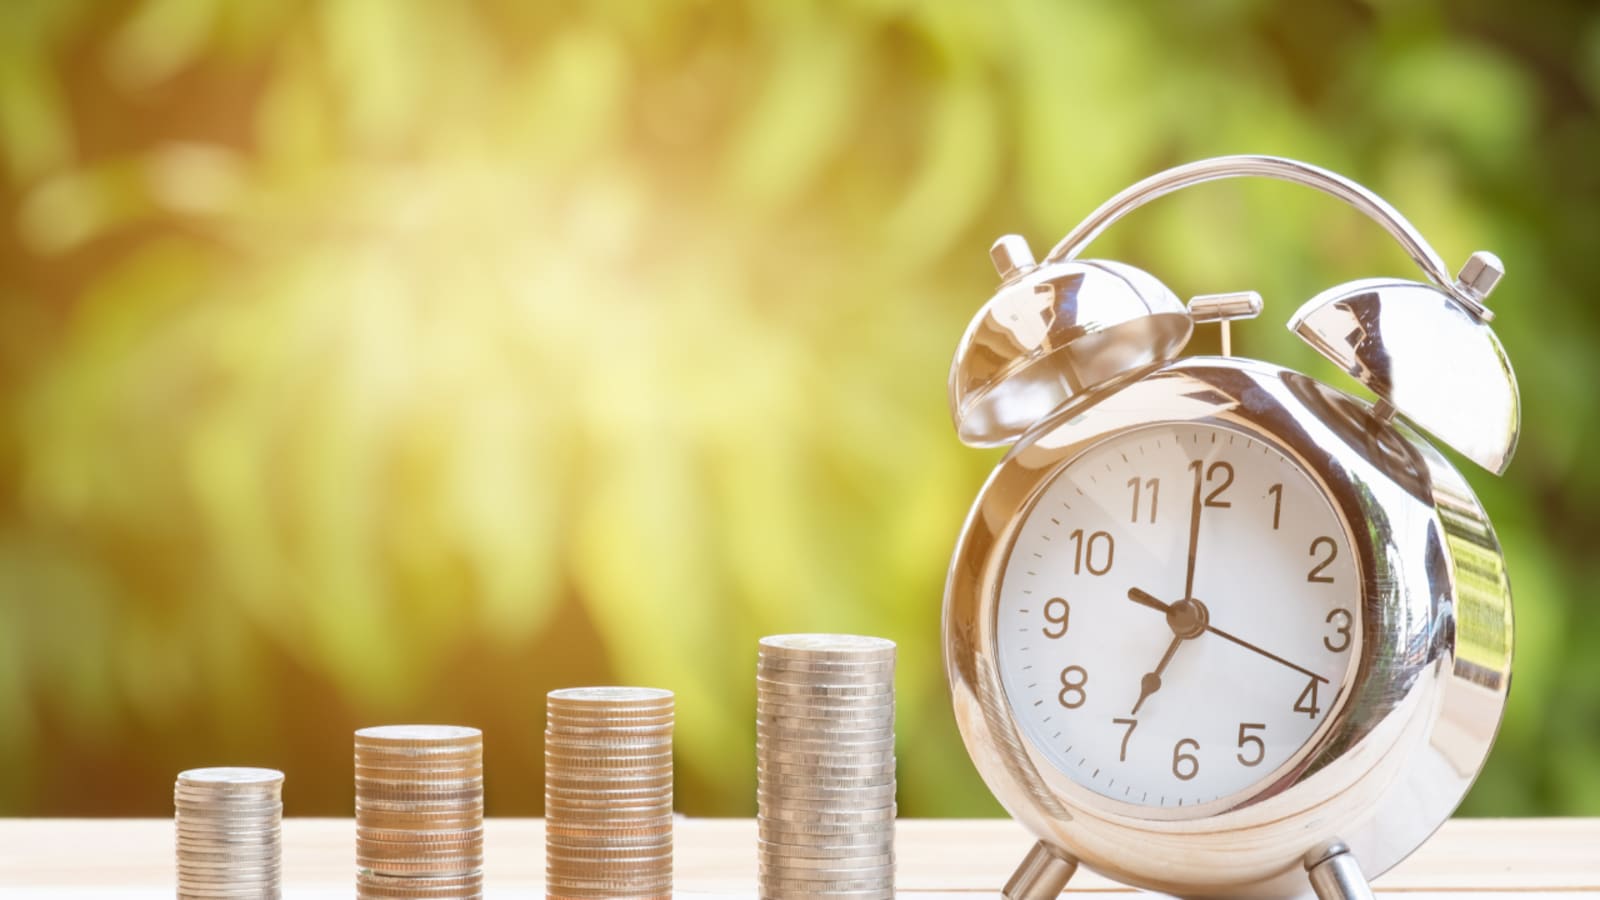 Top 5 tax saving investments for last minute tax planning